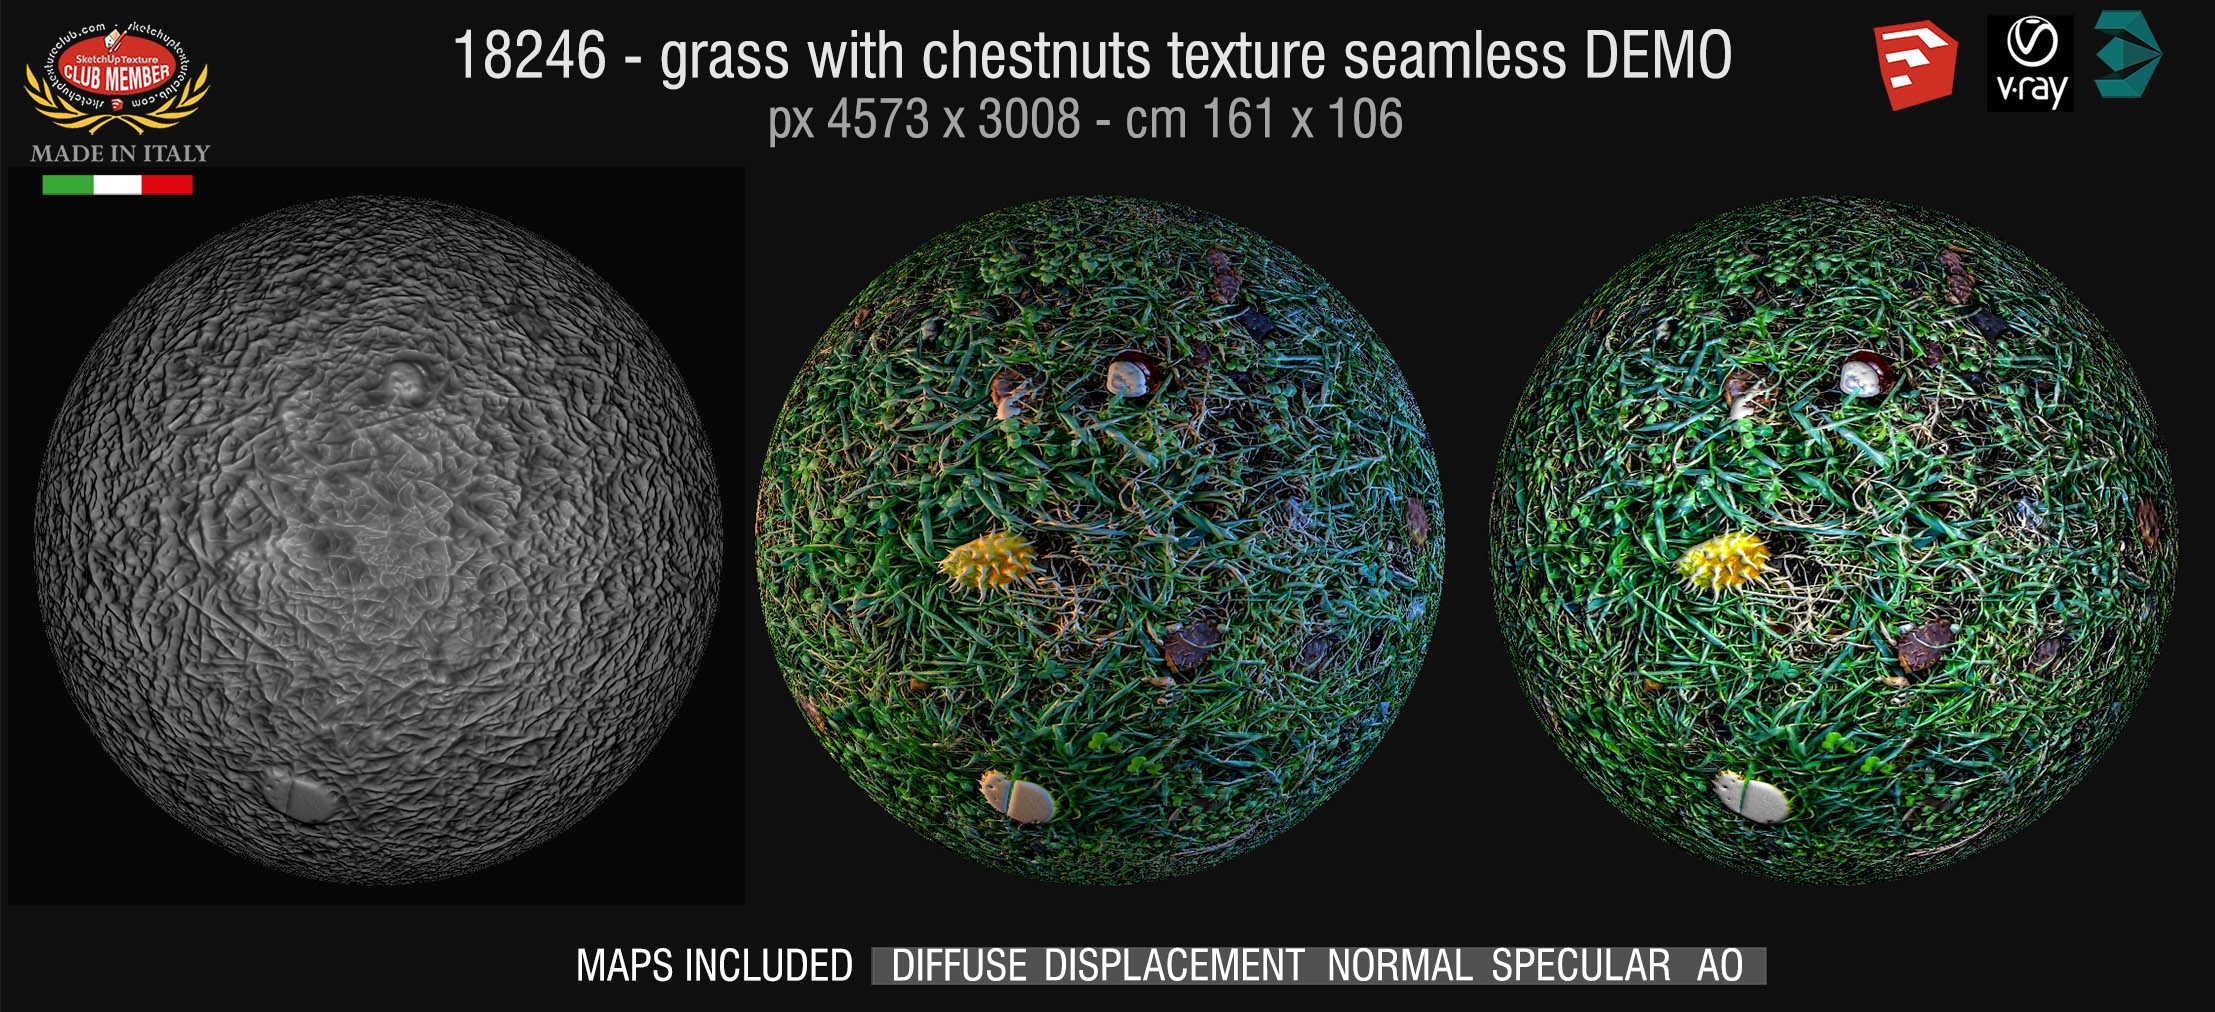 18246 HR Grass with chestnuts texture + maps DEMO